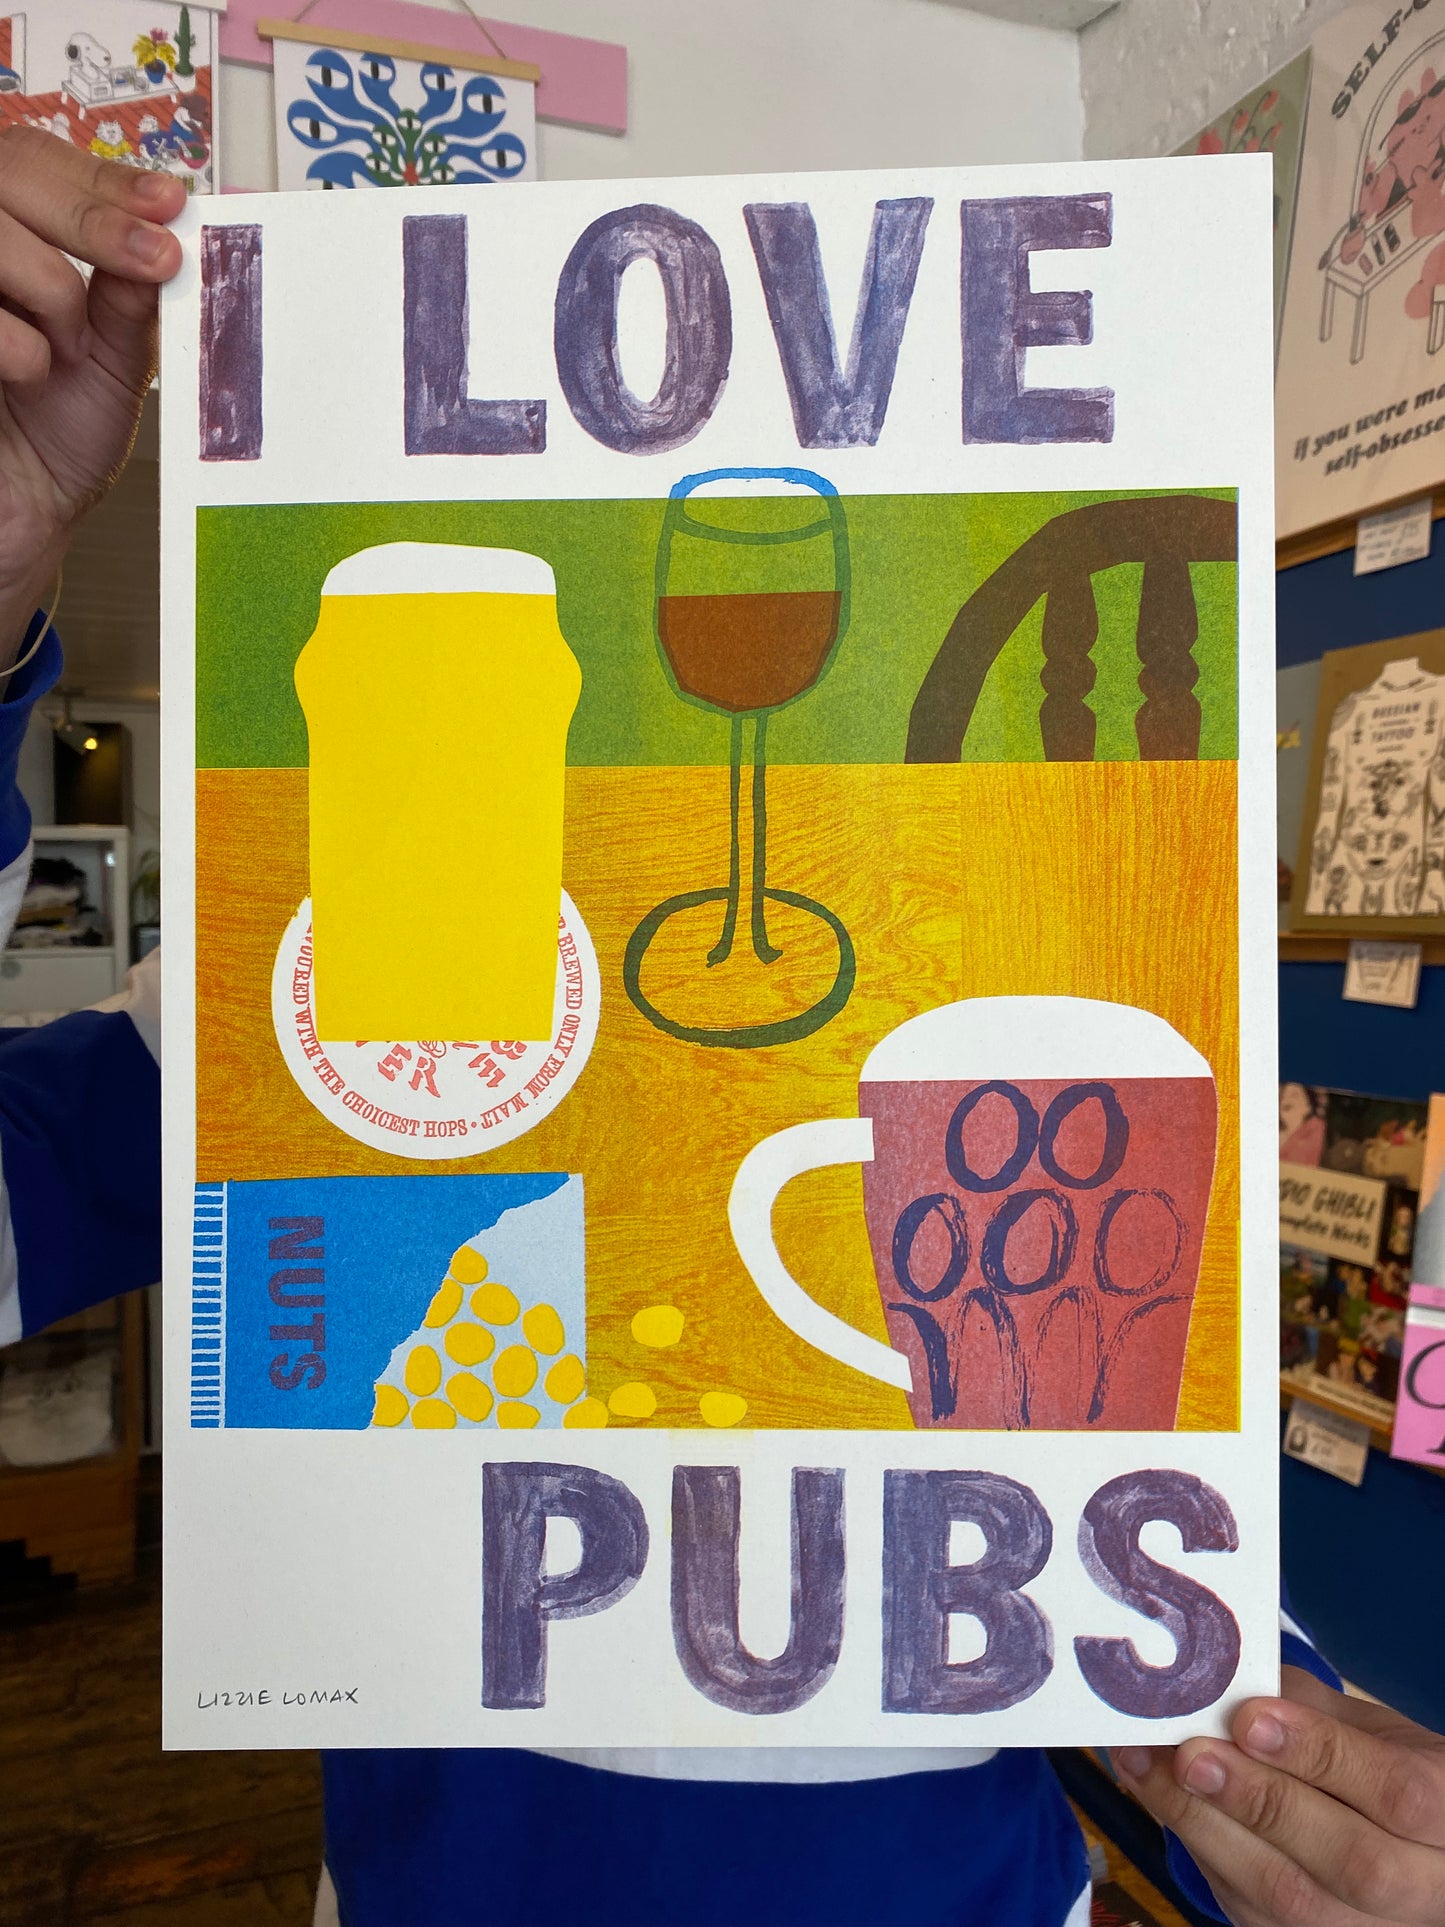 I LOVE PUBS A3 Risograph Print By Lizzie Lomax